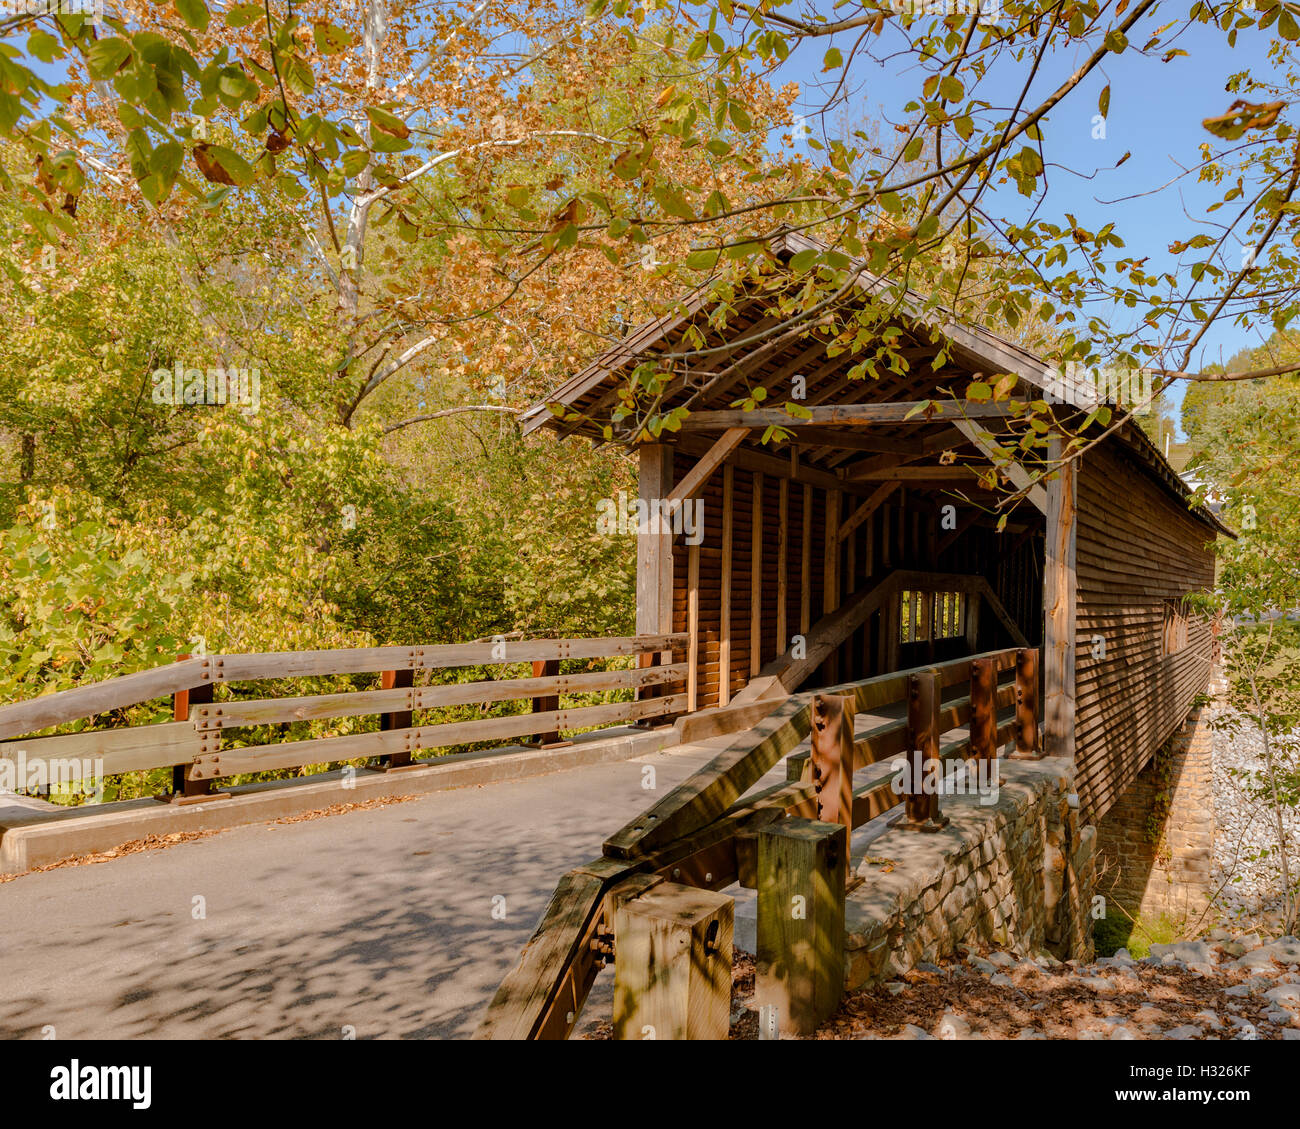 Harrisburg covered bridge in rural Sevier County, Tennessee, USA during the fall or autumn months. Stock Photo